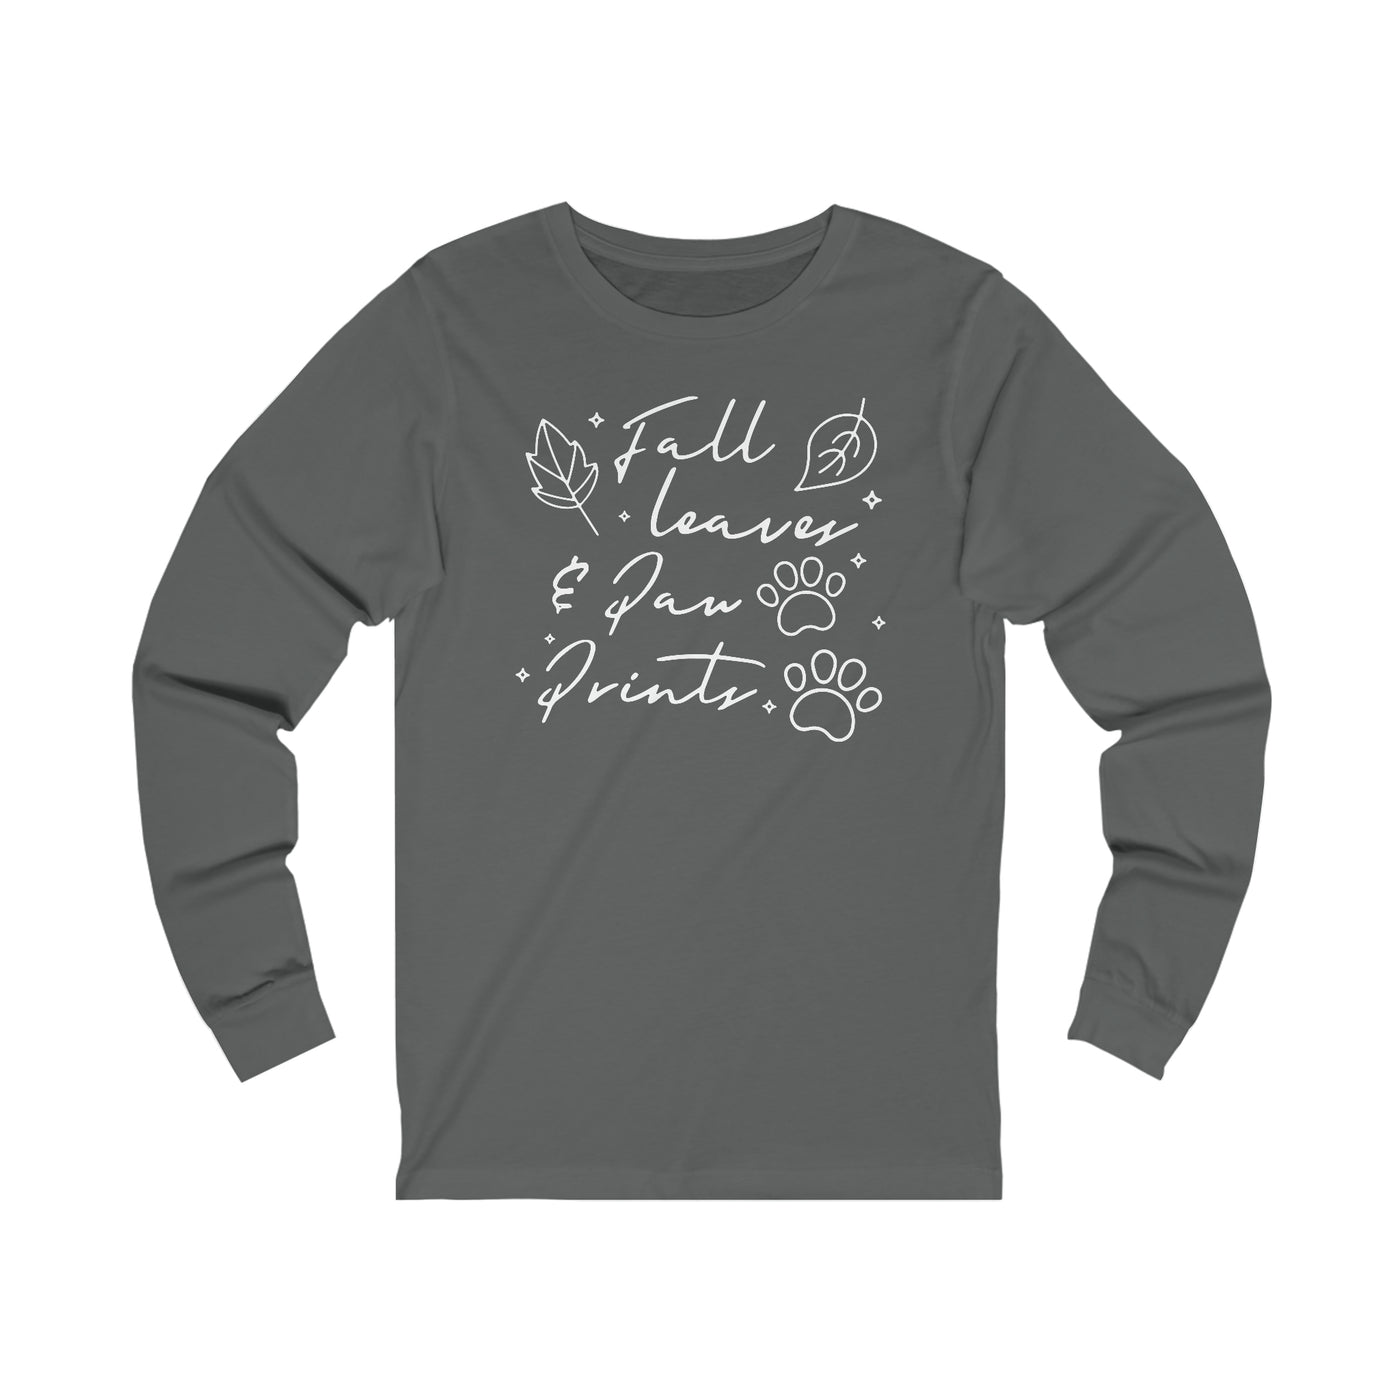 Fall Leaves And Paw Prints Longsleeve